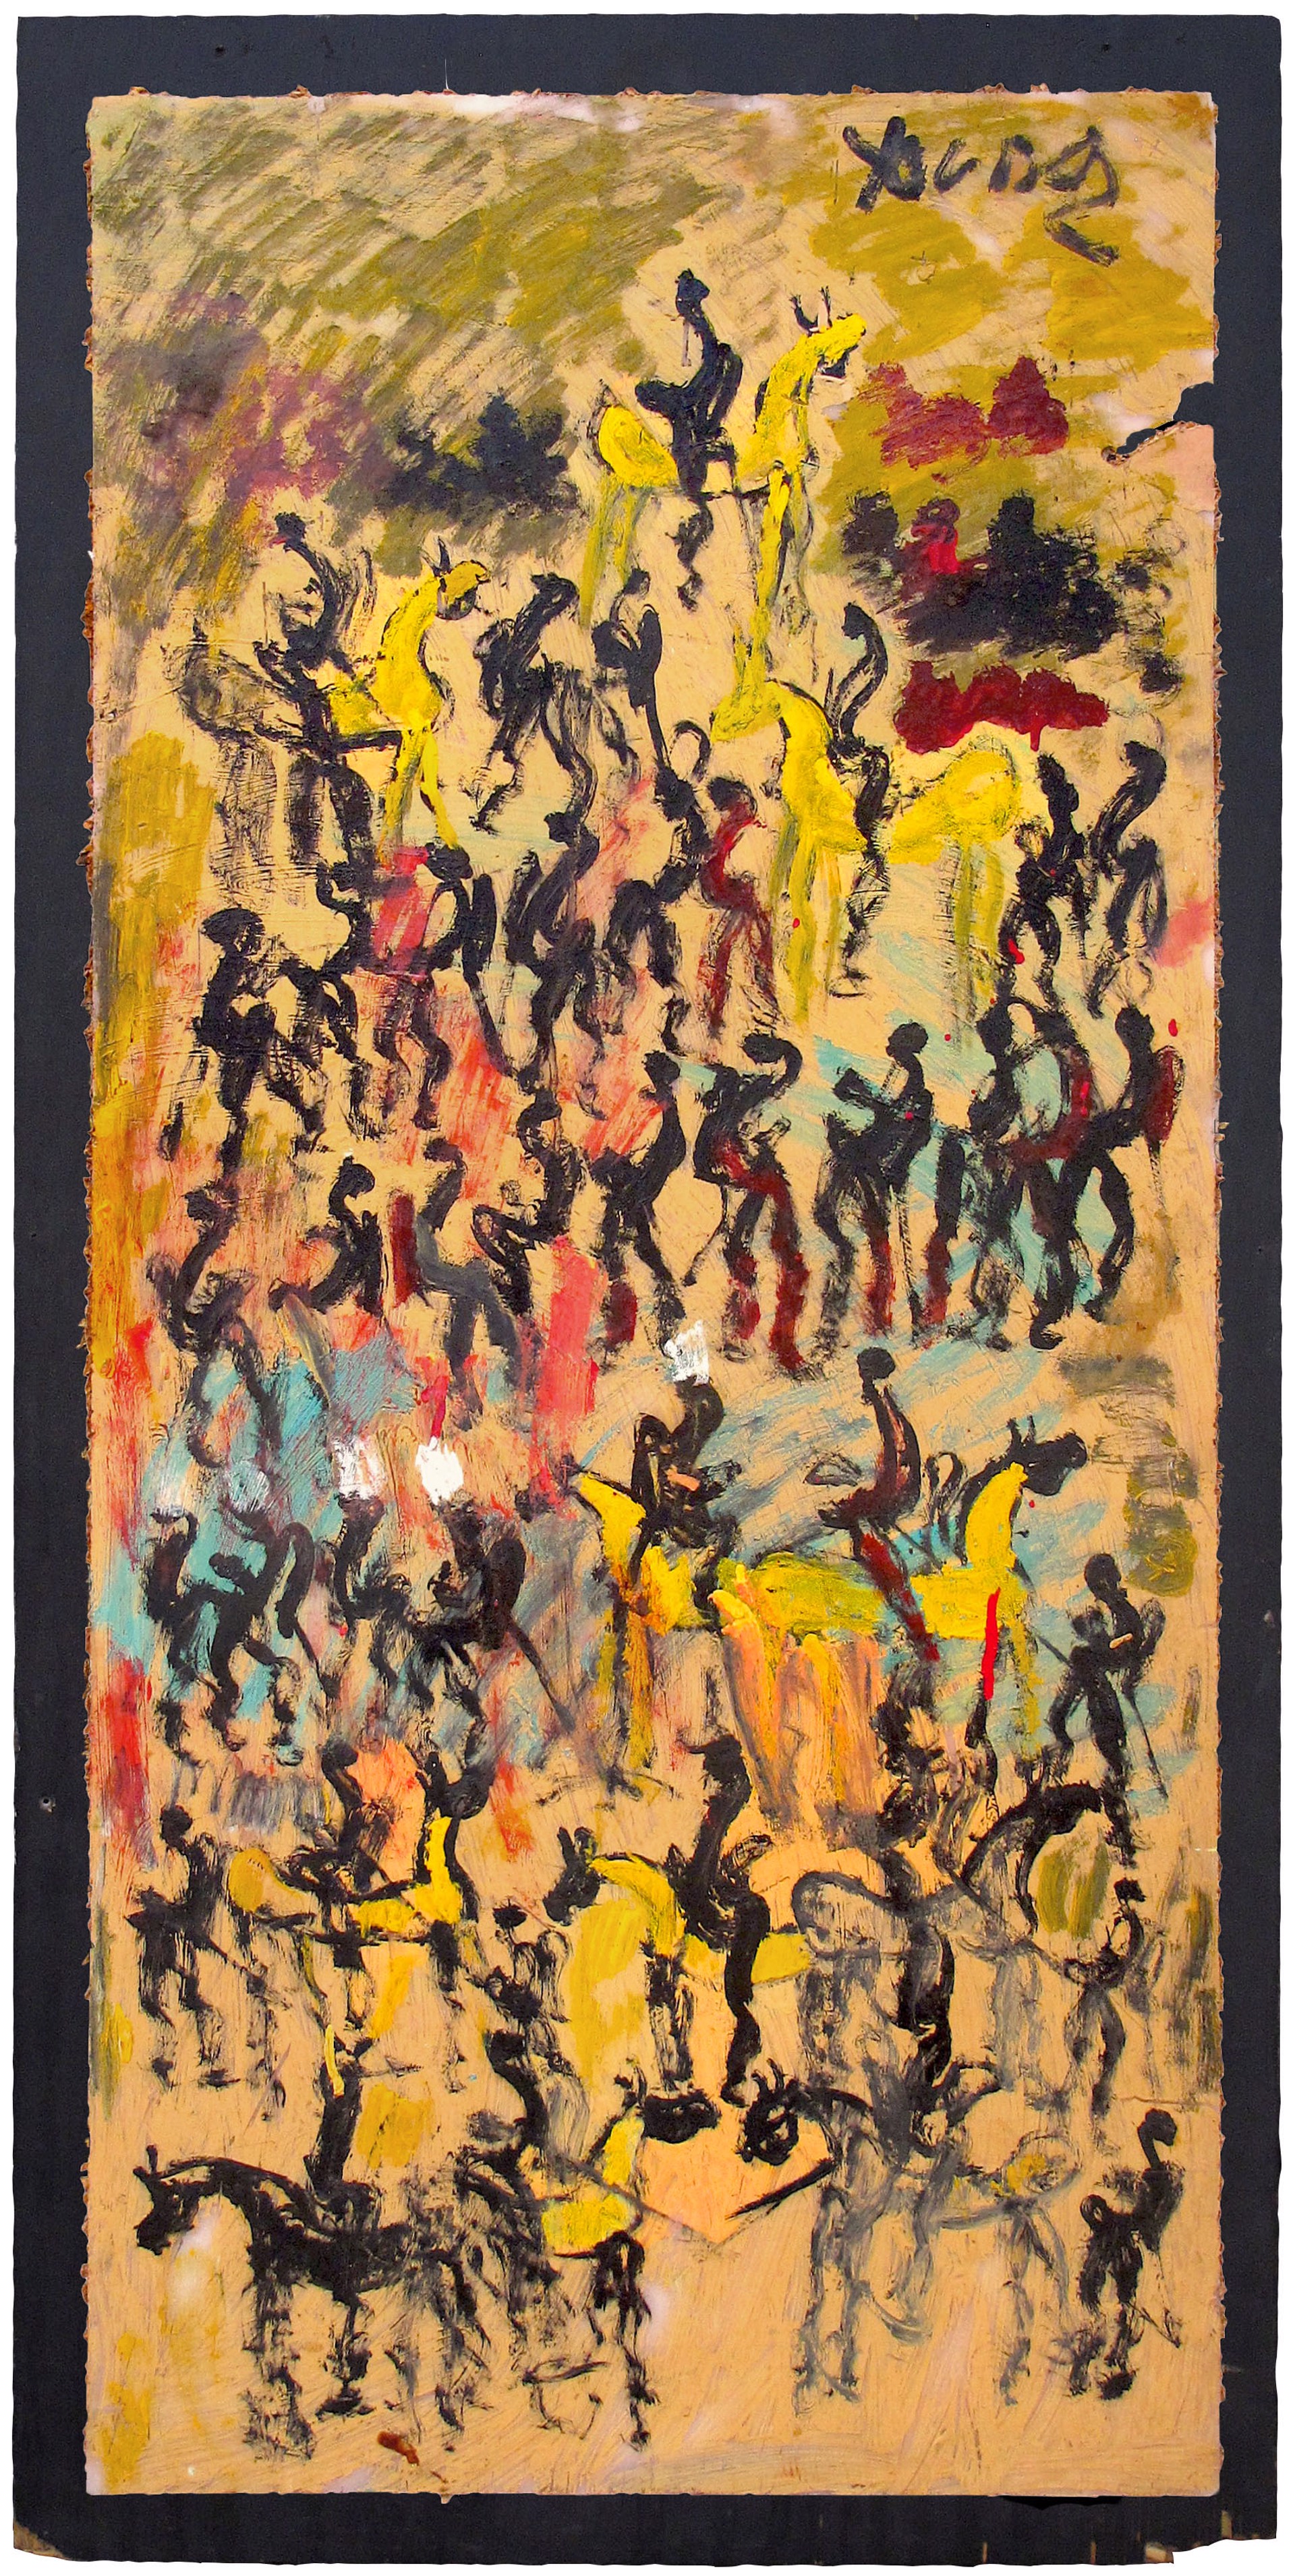 Untitled (Horses and Warriors on Yellow) by Purvis Young